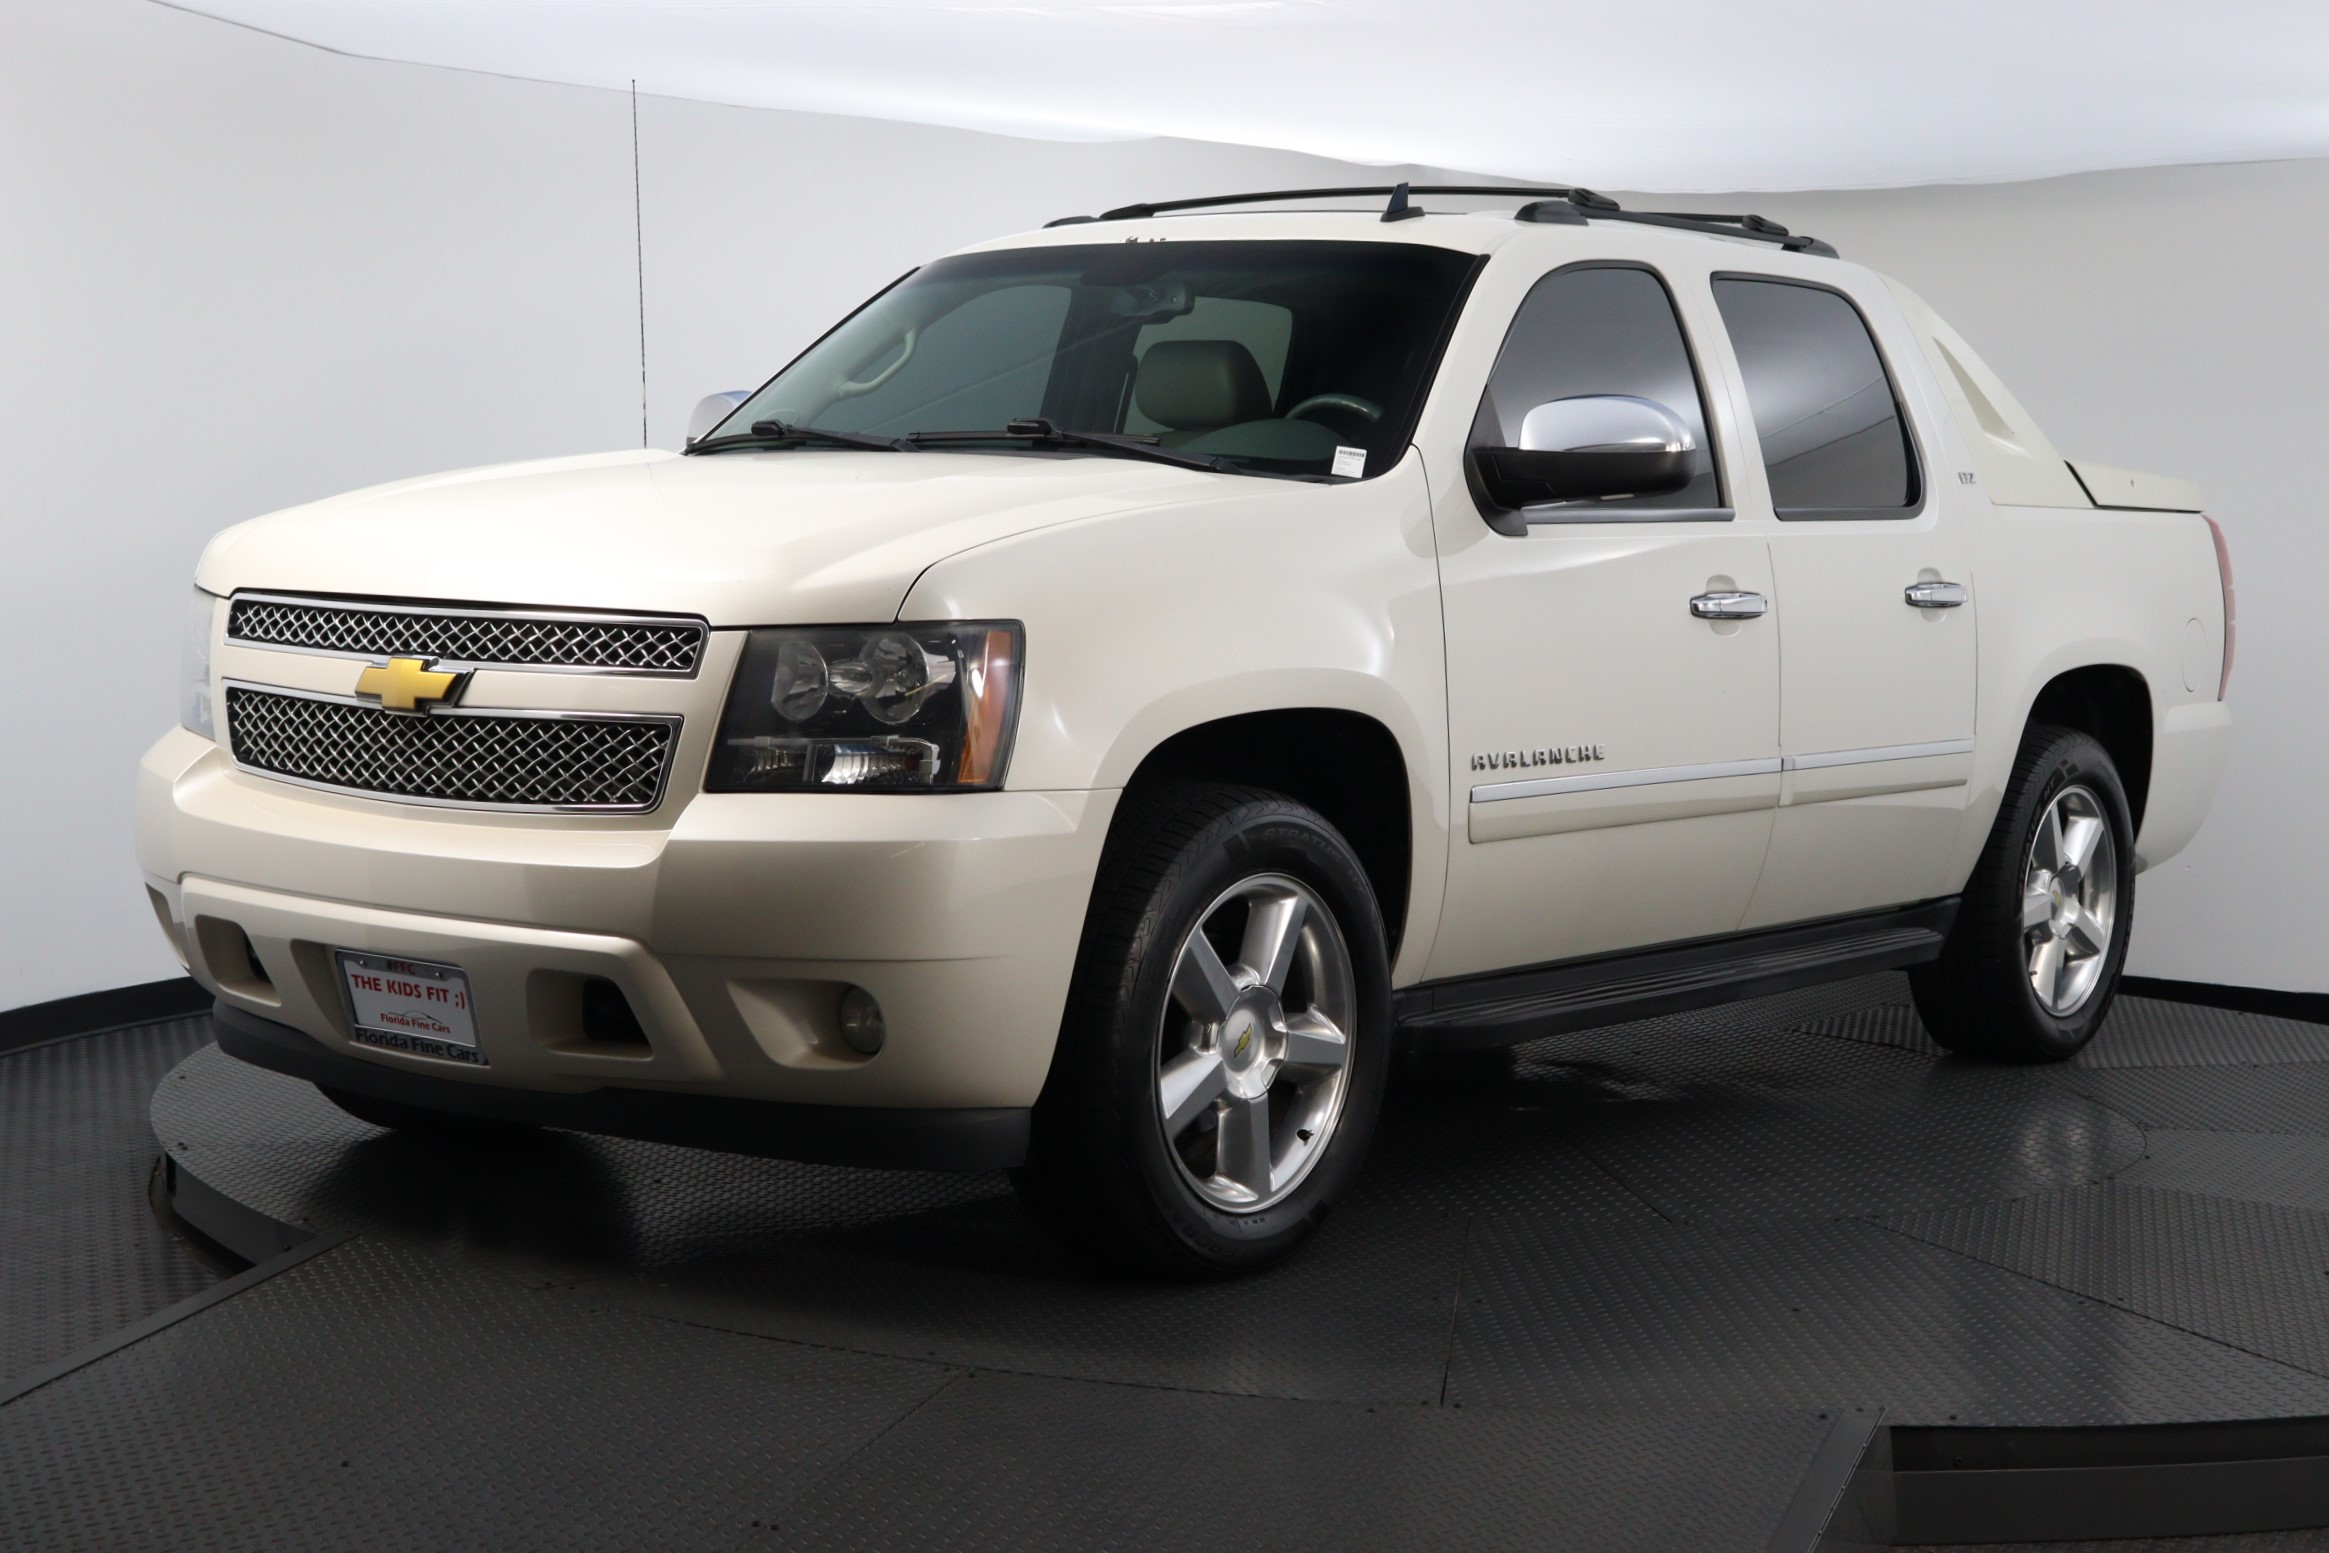 Used 2012 CHEVROLET AVALANCHE LTZ for sale in WEST PALM | 124584